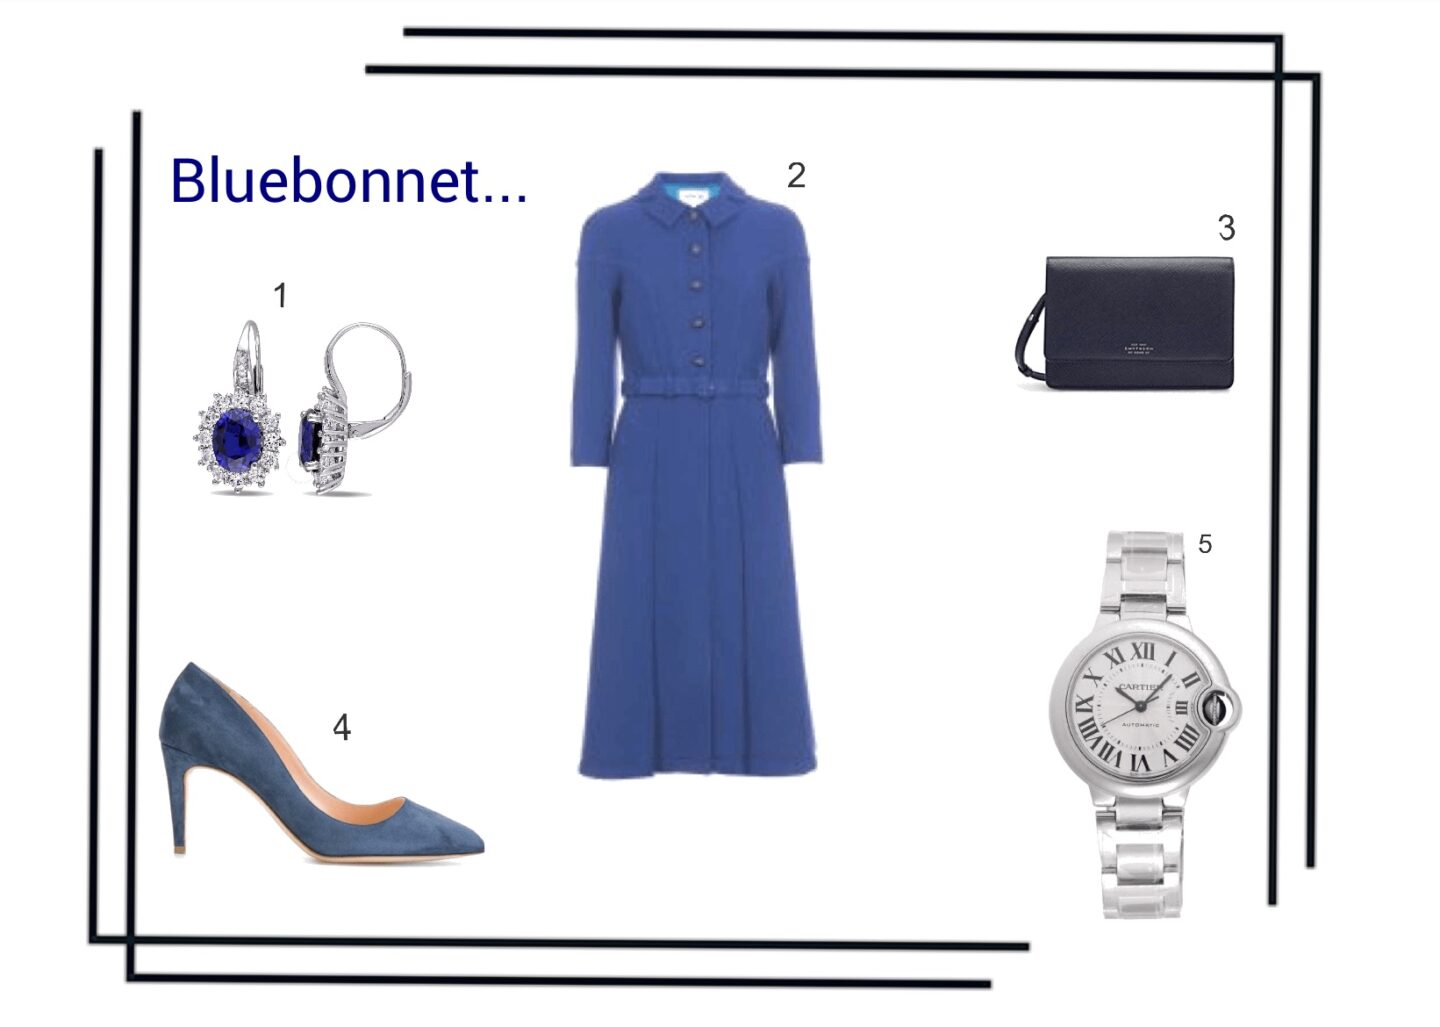 Instagram: @pslilyboutique, Pinterest, Los Angeles fashion blogger, top fashion blog, best fashion blog, fashion & personal style blog, travel blog, travel blogger, LA fashion blogger, Bluebonnet, RUPERT SANDERSON Nada pumps in bluebonnet, SMYTHSON Panama cross-grained leather wallet with strap in navy, Cartier Balloon Bleu Silver Watch, Sapphire and Diamond Drop Earrings, Eponine London royal blue belted dress coat, Fall & Winter 2018 Outfit Ideas, Shopping, Inspiration, 11.14.18